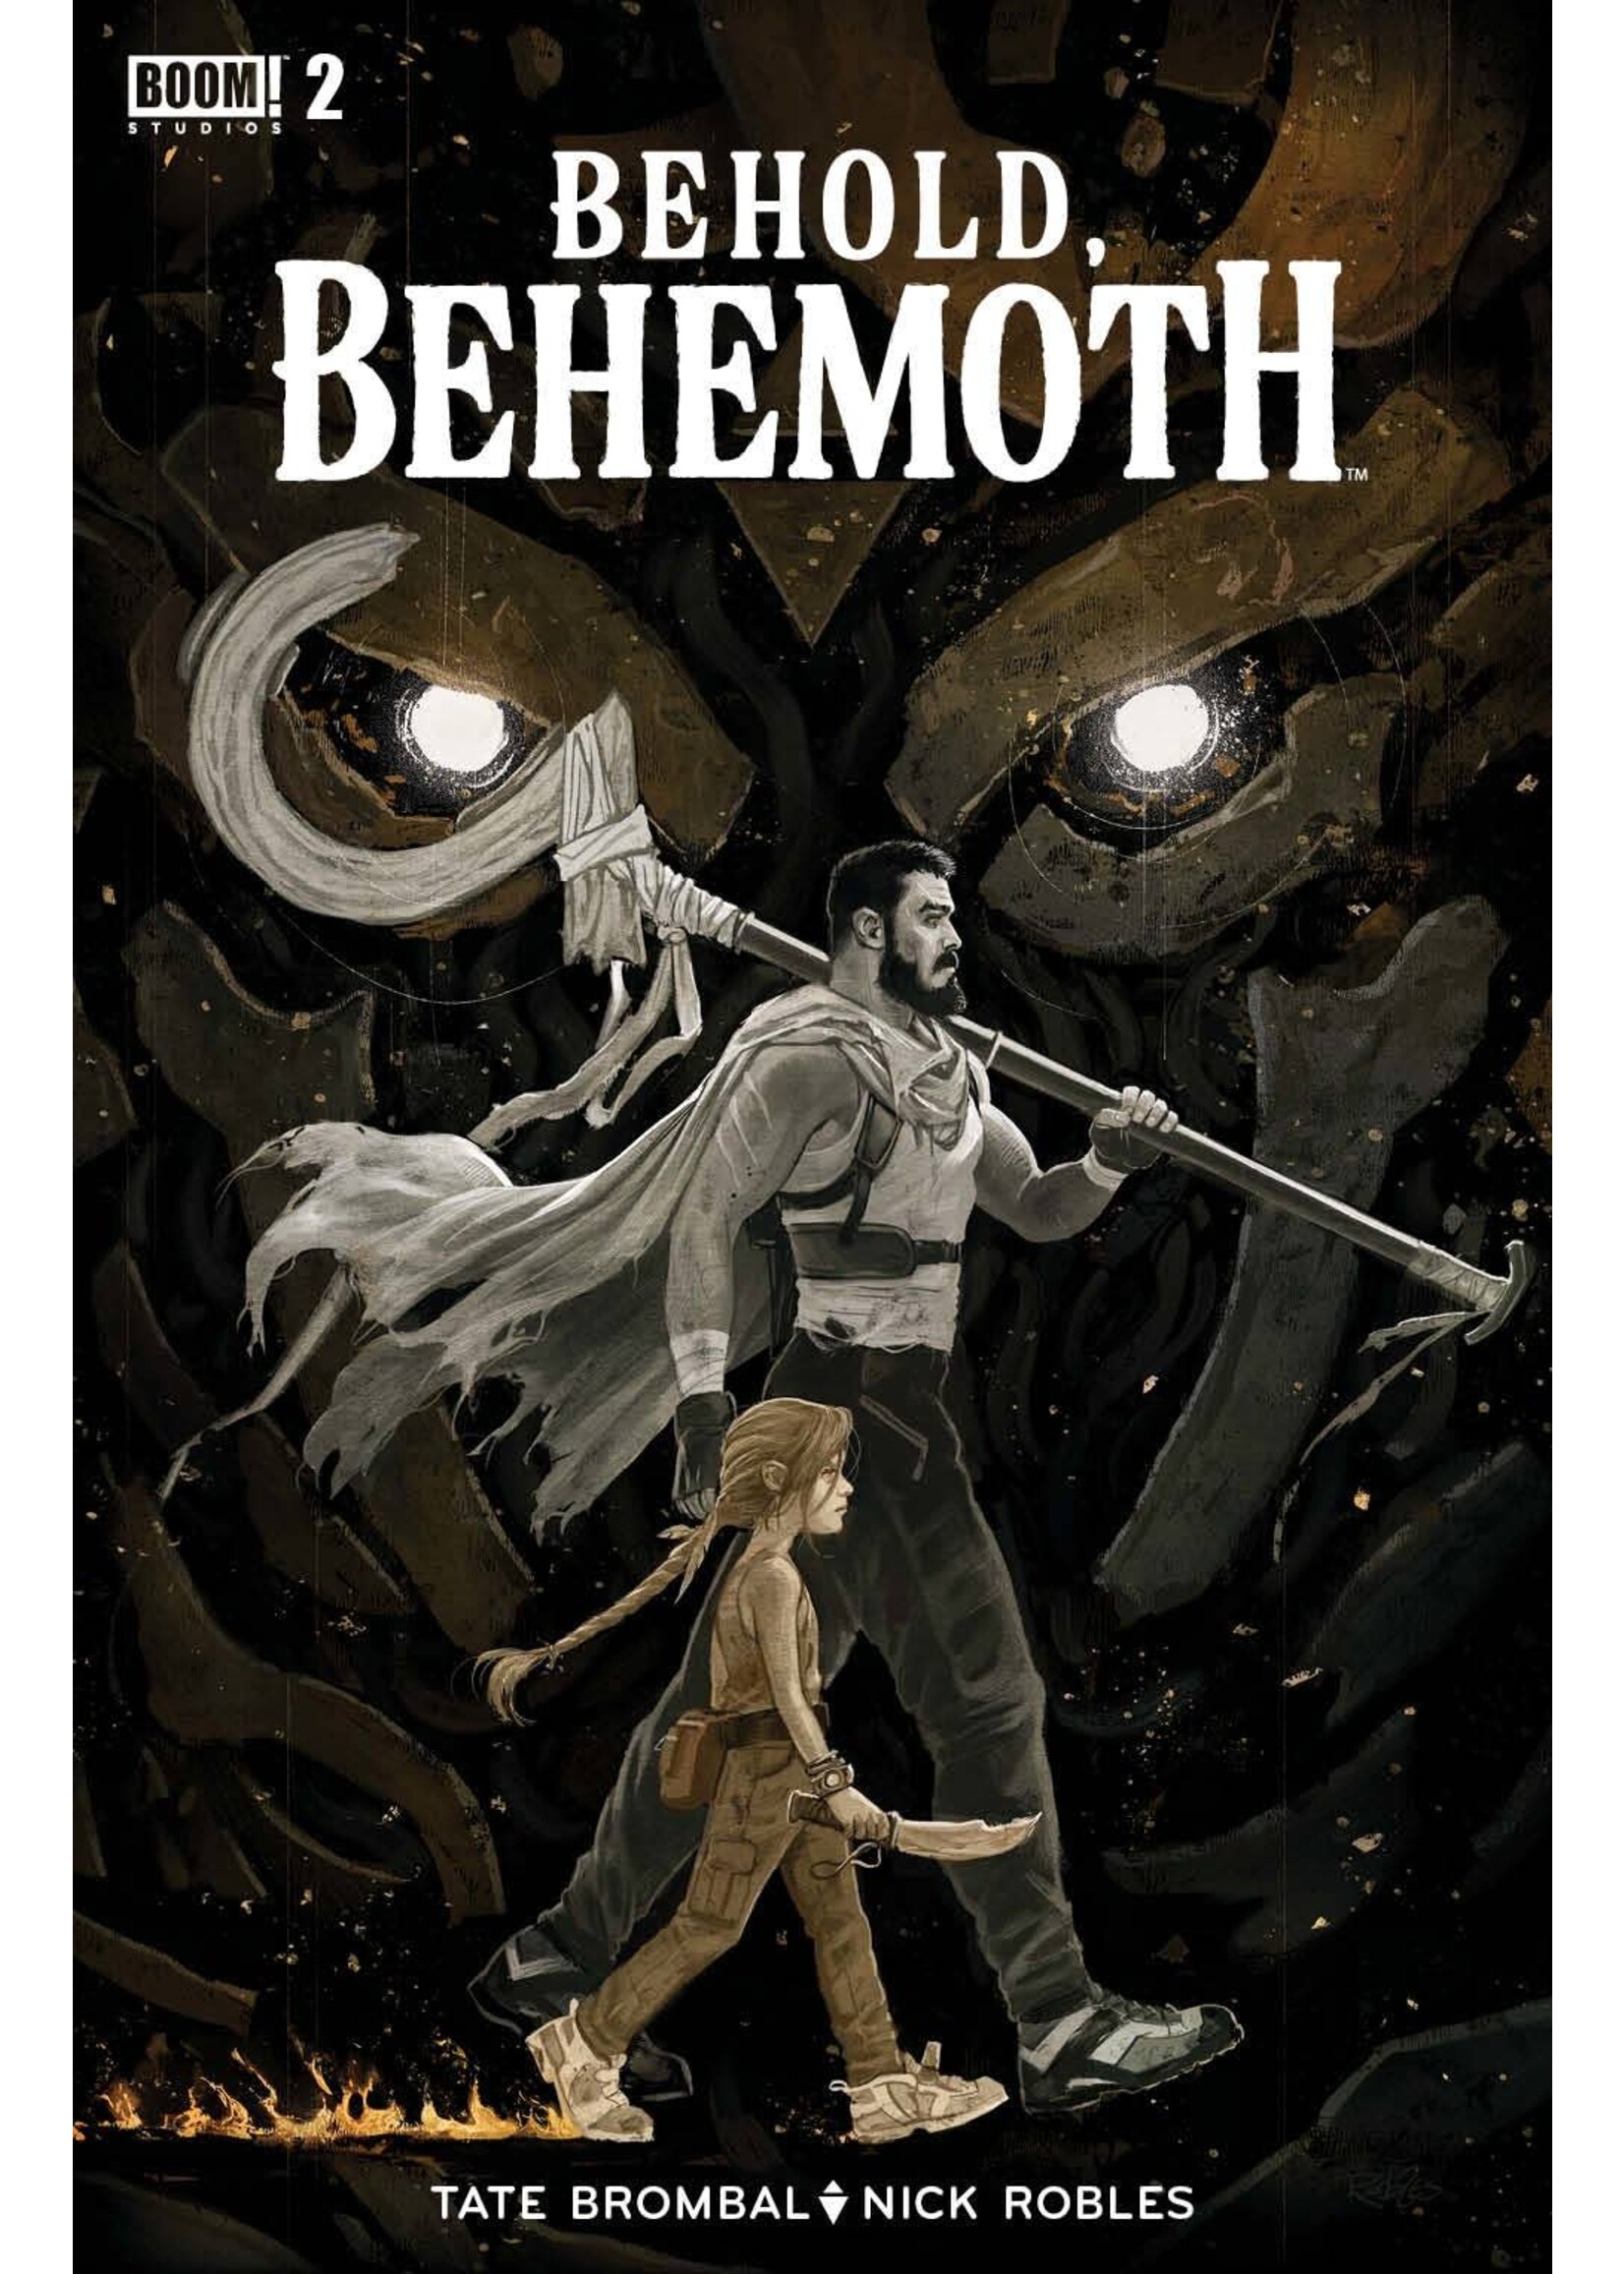 IMAGE COMICS BEHOLD BEHEMOTH complete 5 issue series